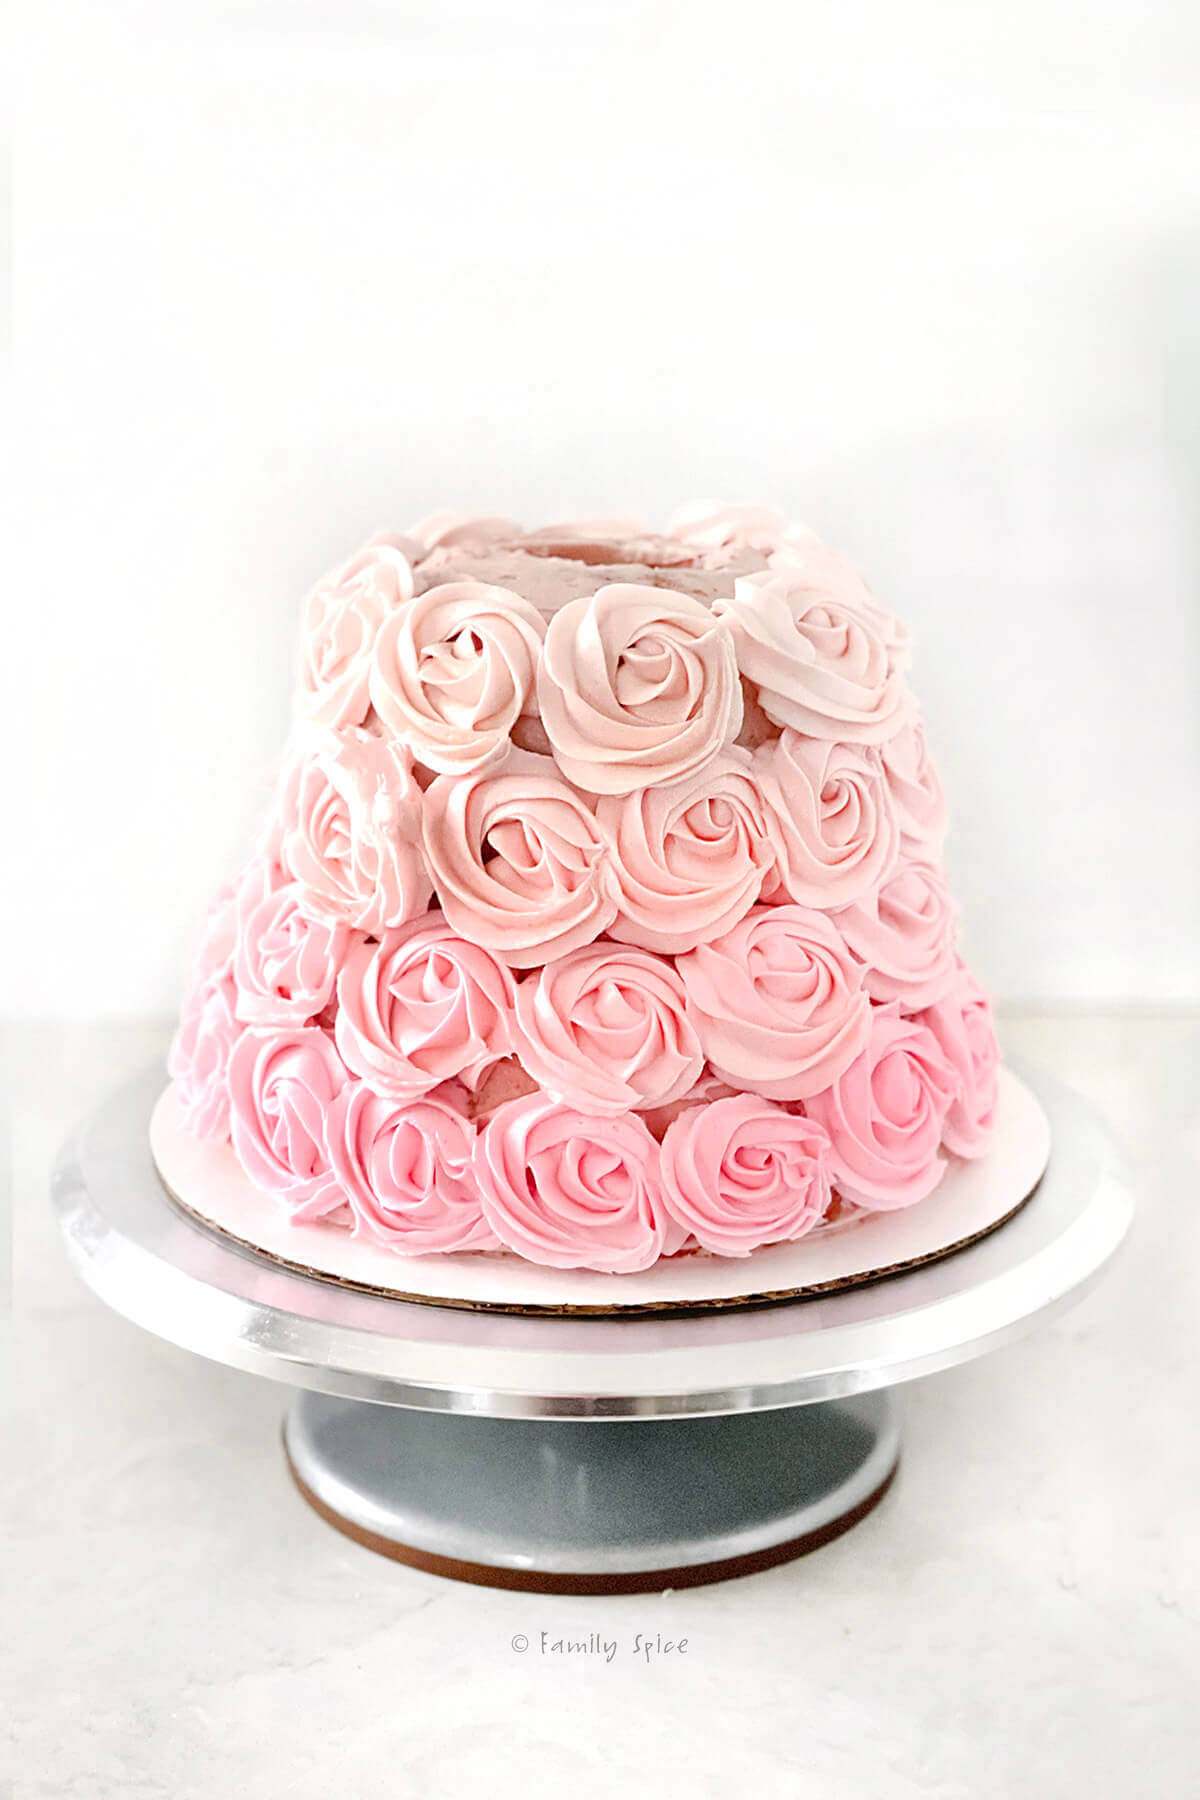 A bell shaped strawberry cake with ombre pink rosettes piped onto it